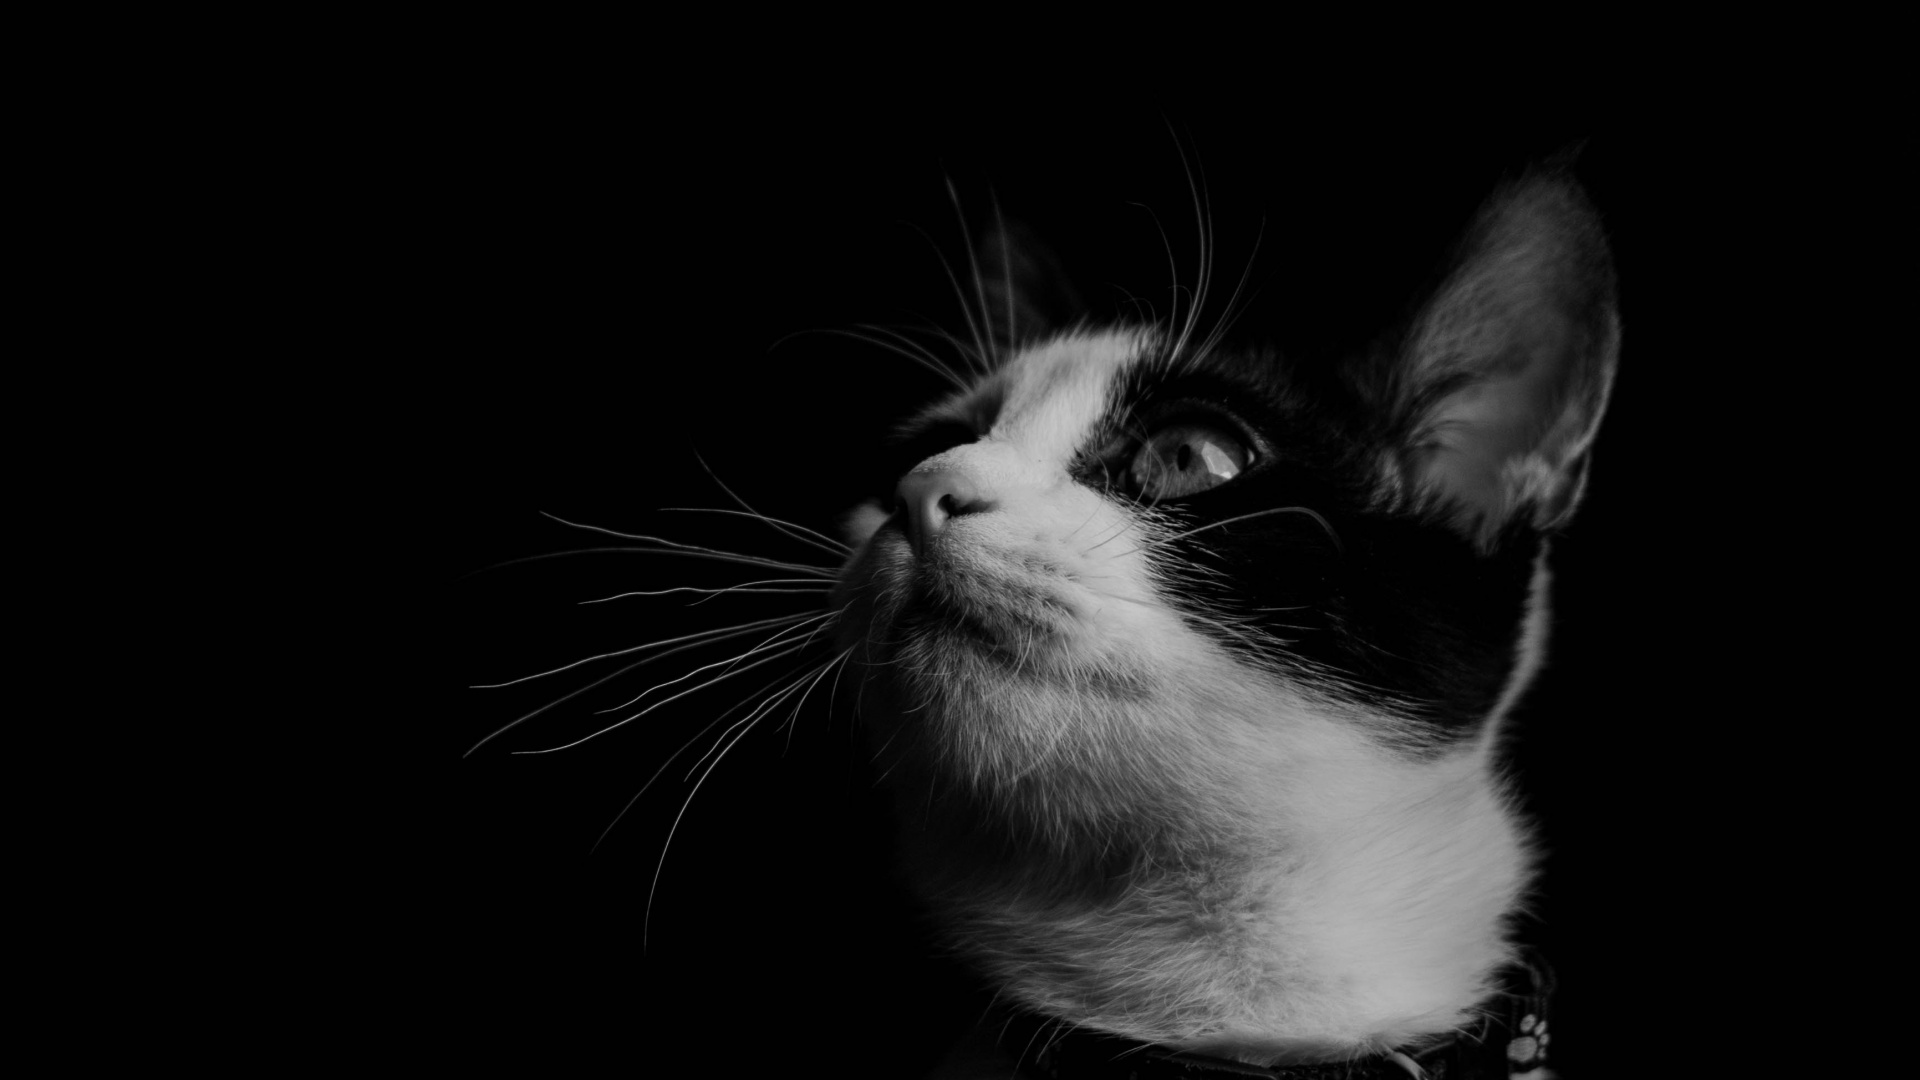 Grayscale Photo of Cat With Black Background. Wallpaper in 1920x1080 Resolution